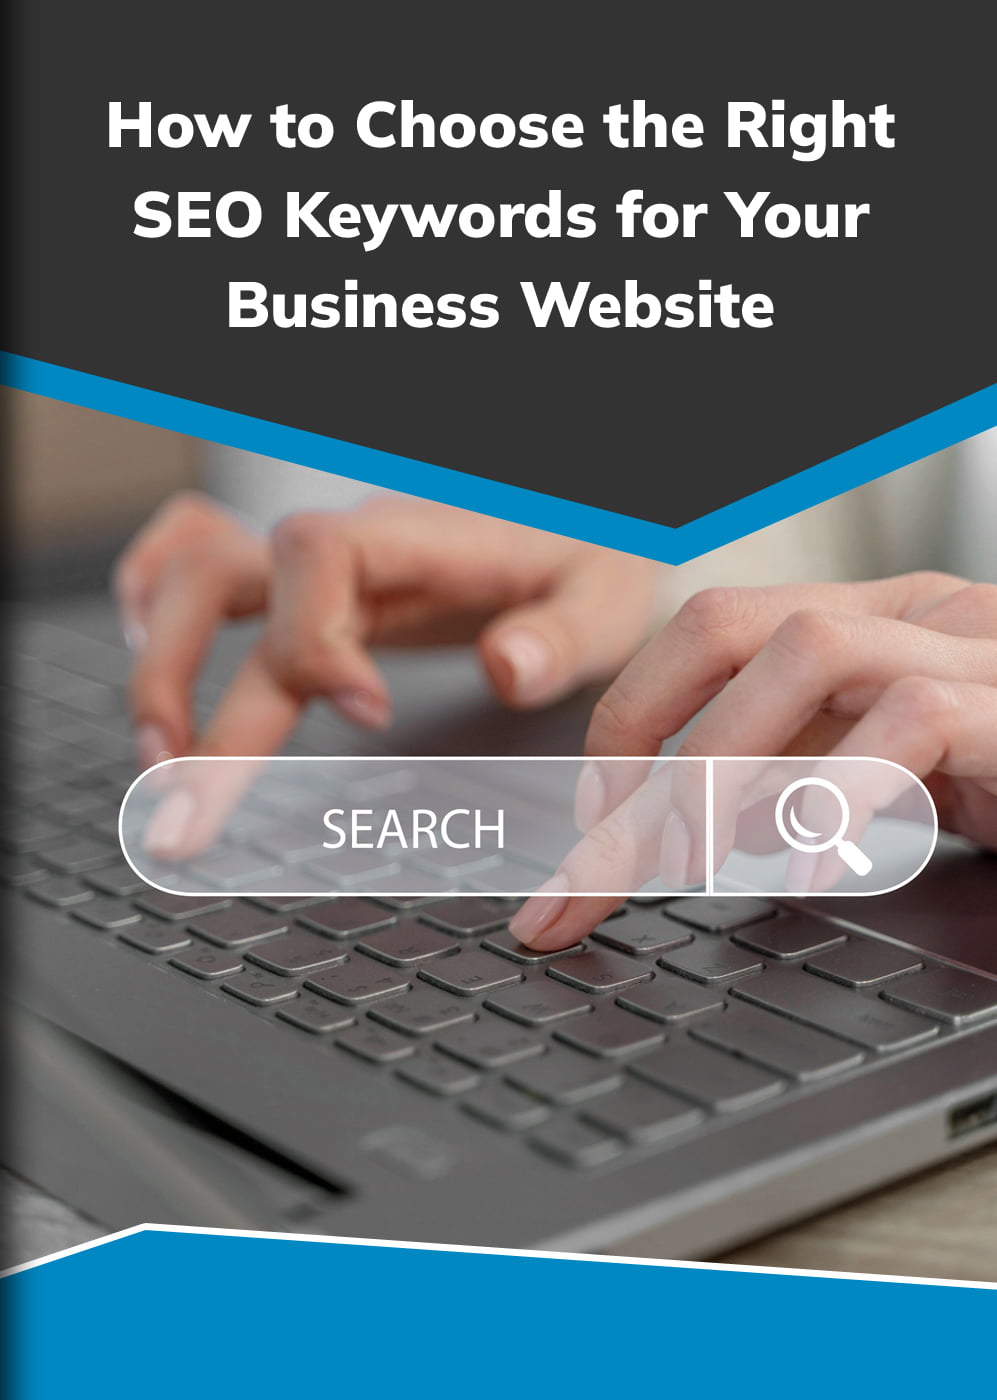 How-to-Choose-the-Right-SEO-Keywords-for-Your-Business-Website